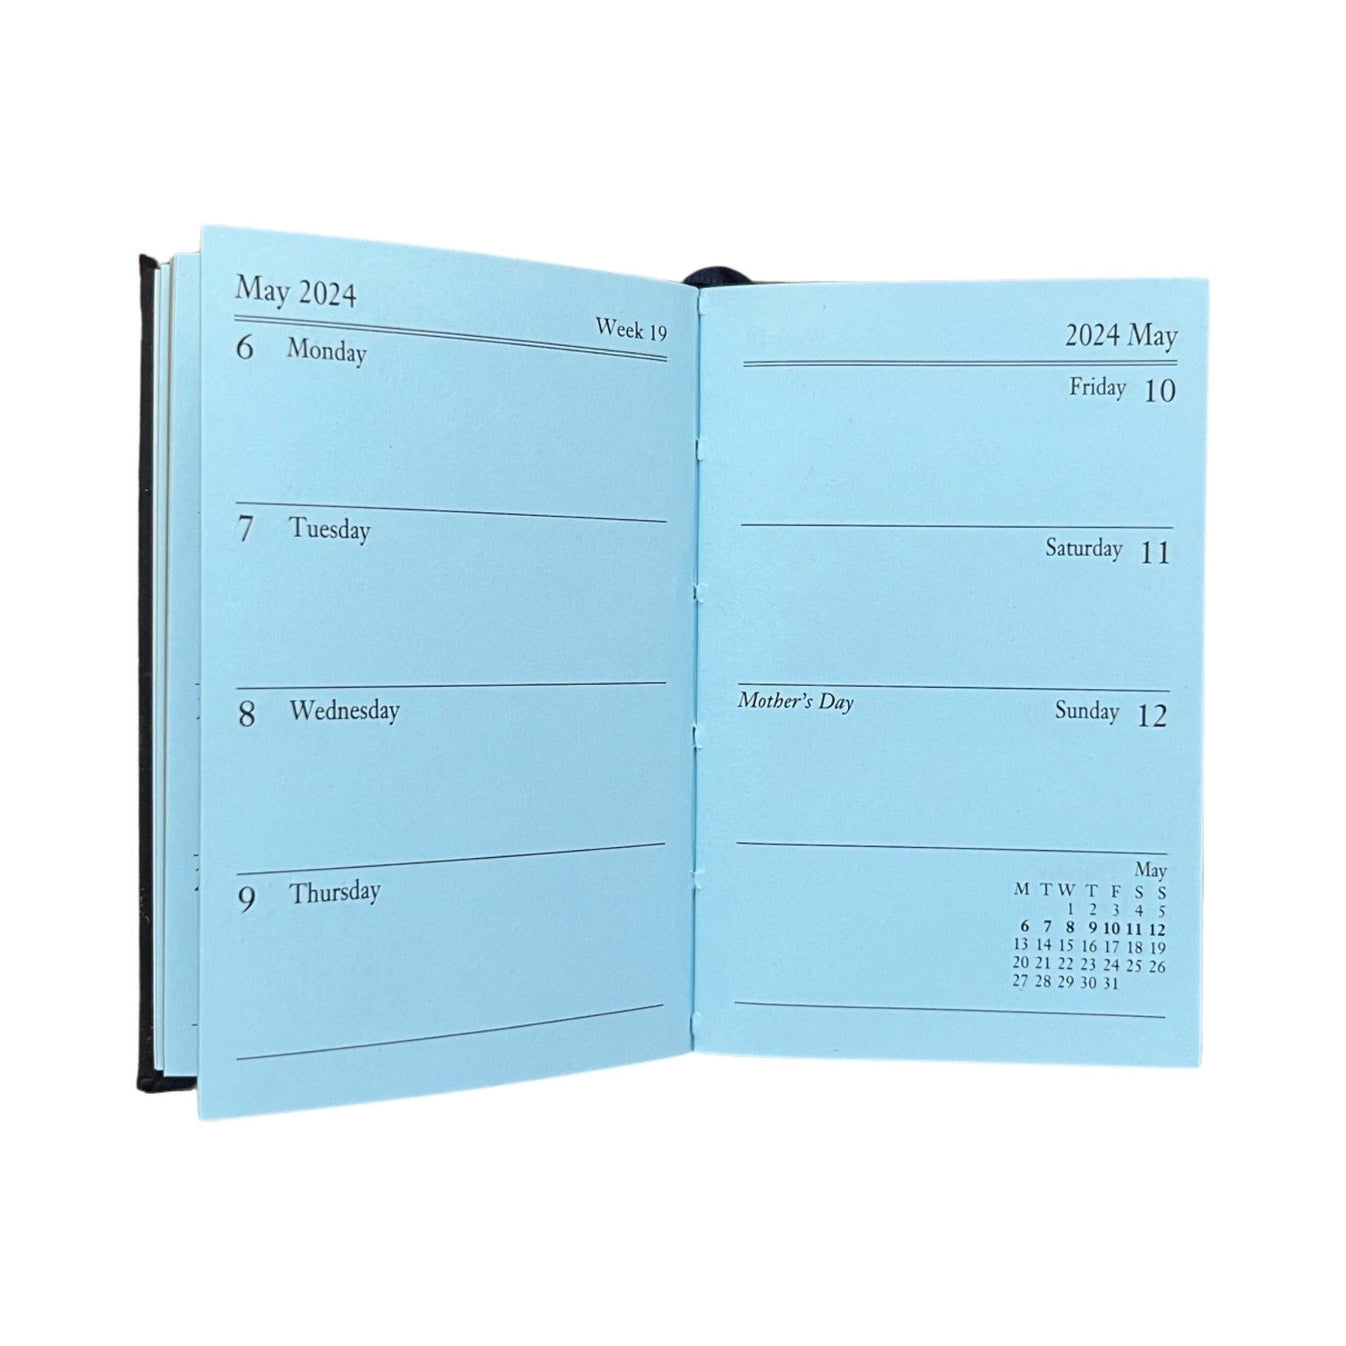 Charing Cross 2024 3x2 Calendar Book Leather Pocket Planner Made